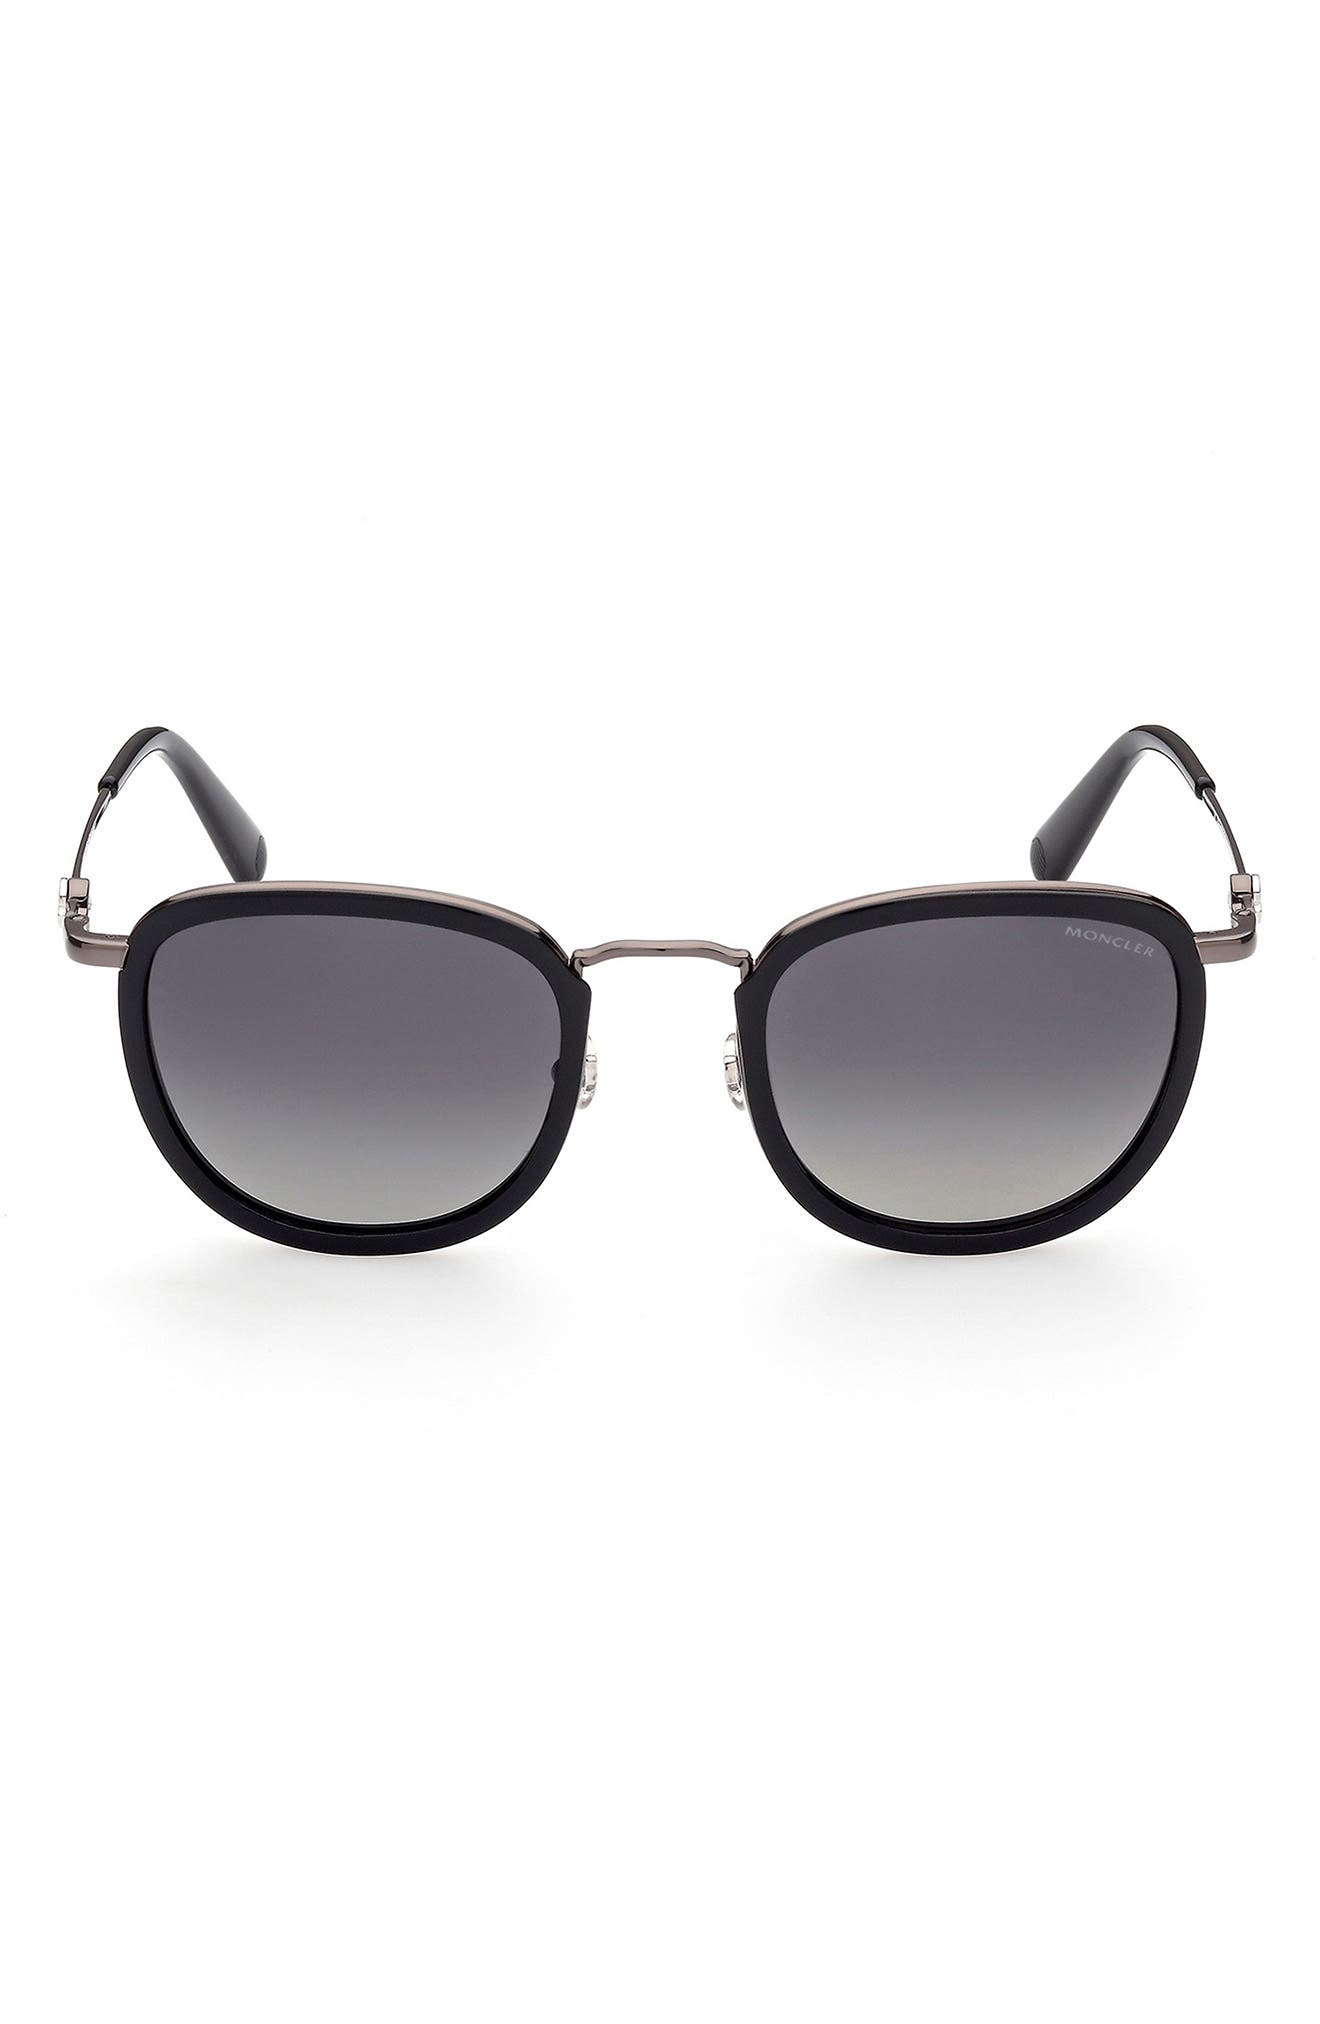 Moncler 52mm Polarized Round Sunglasses in Black/Smoke at Nordstrom